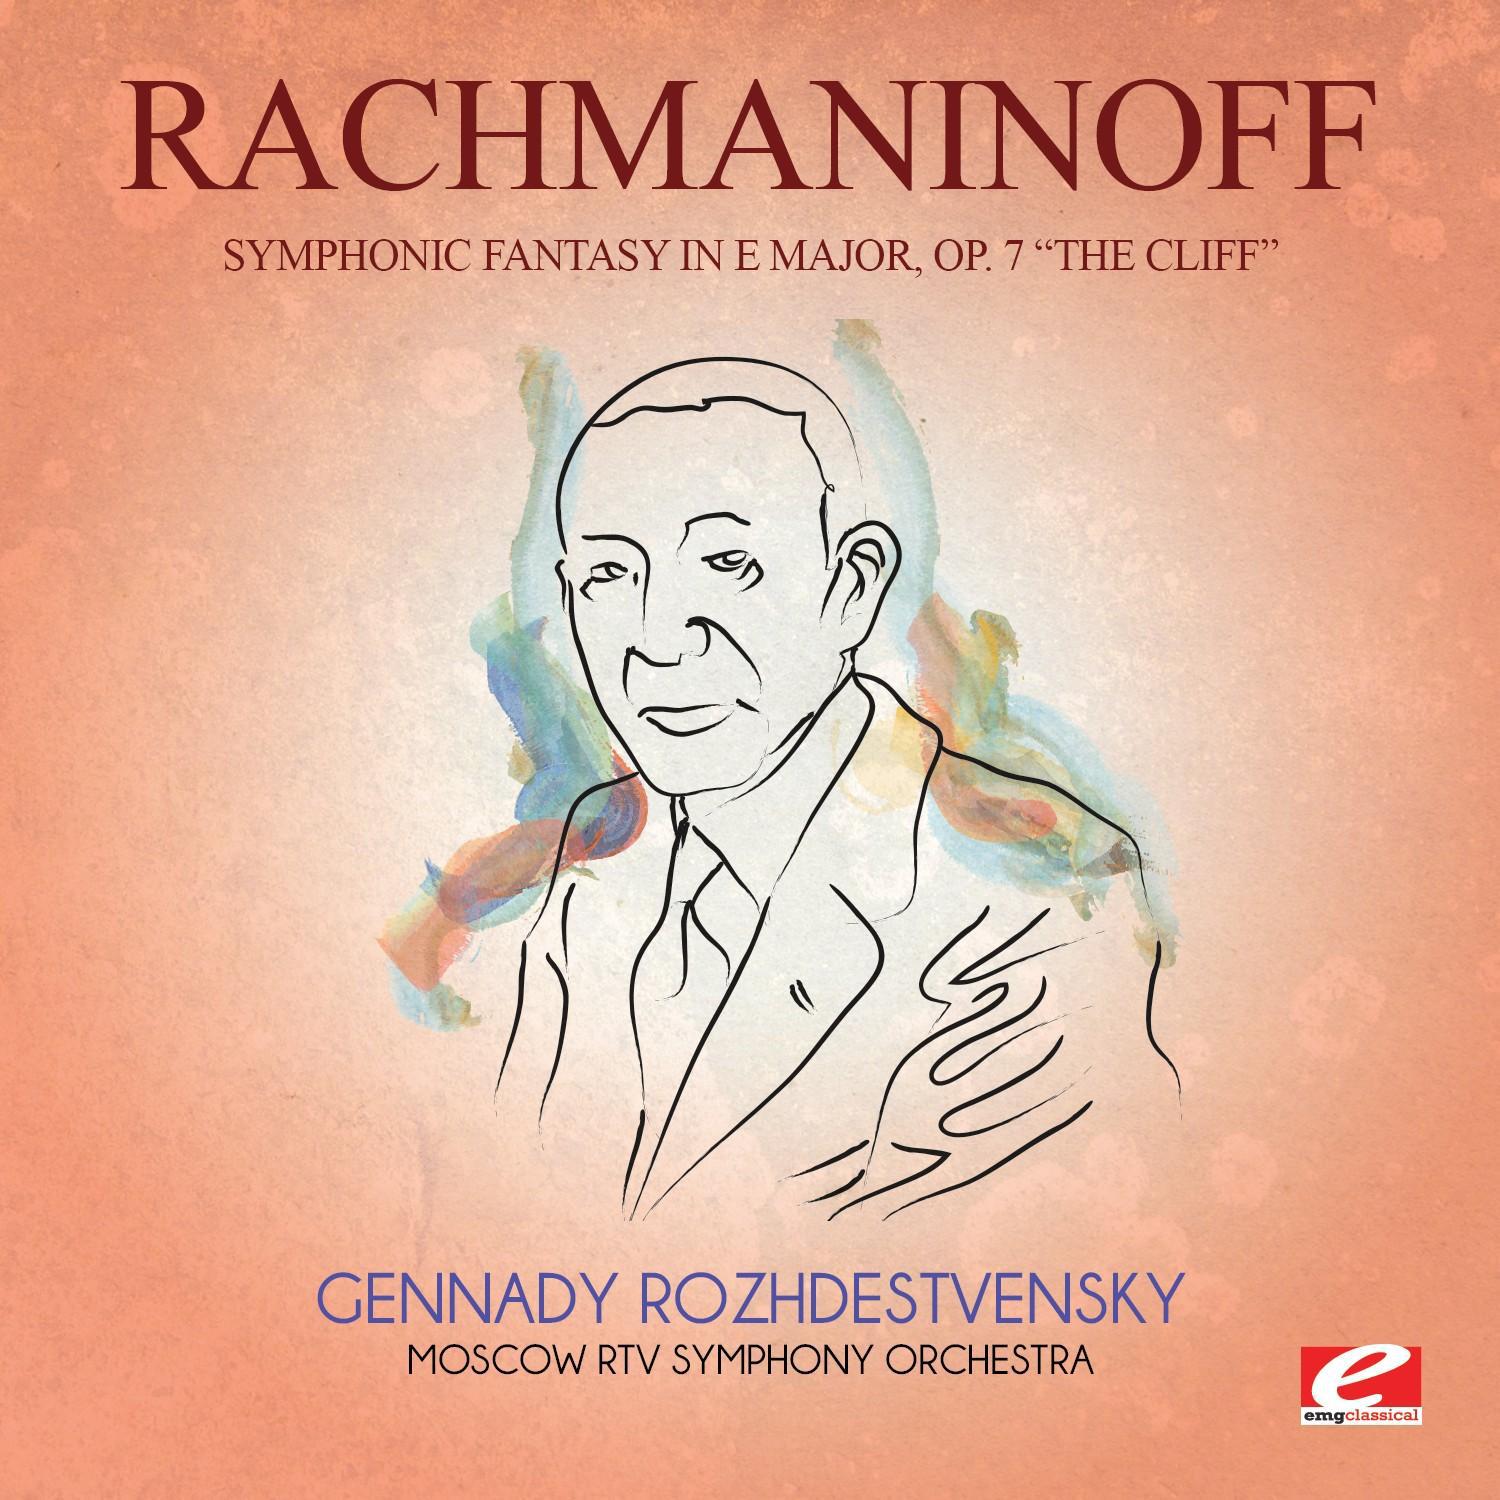 Rachmaninoff: Symphonic Fantasy in E Major, Op. 7 "The Cliff" (Digitally Remastered)